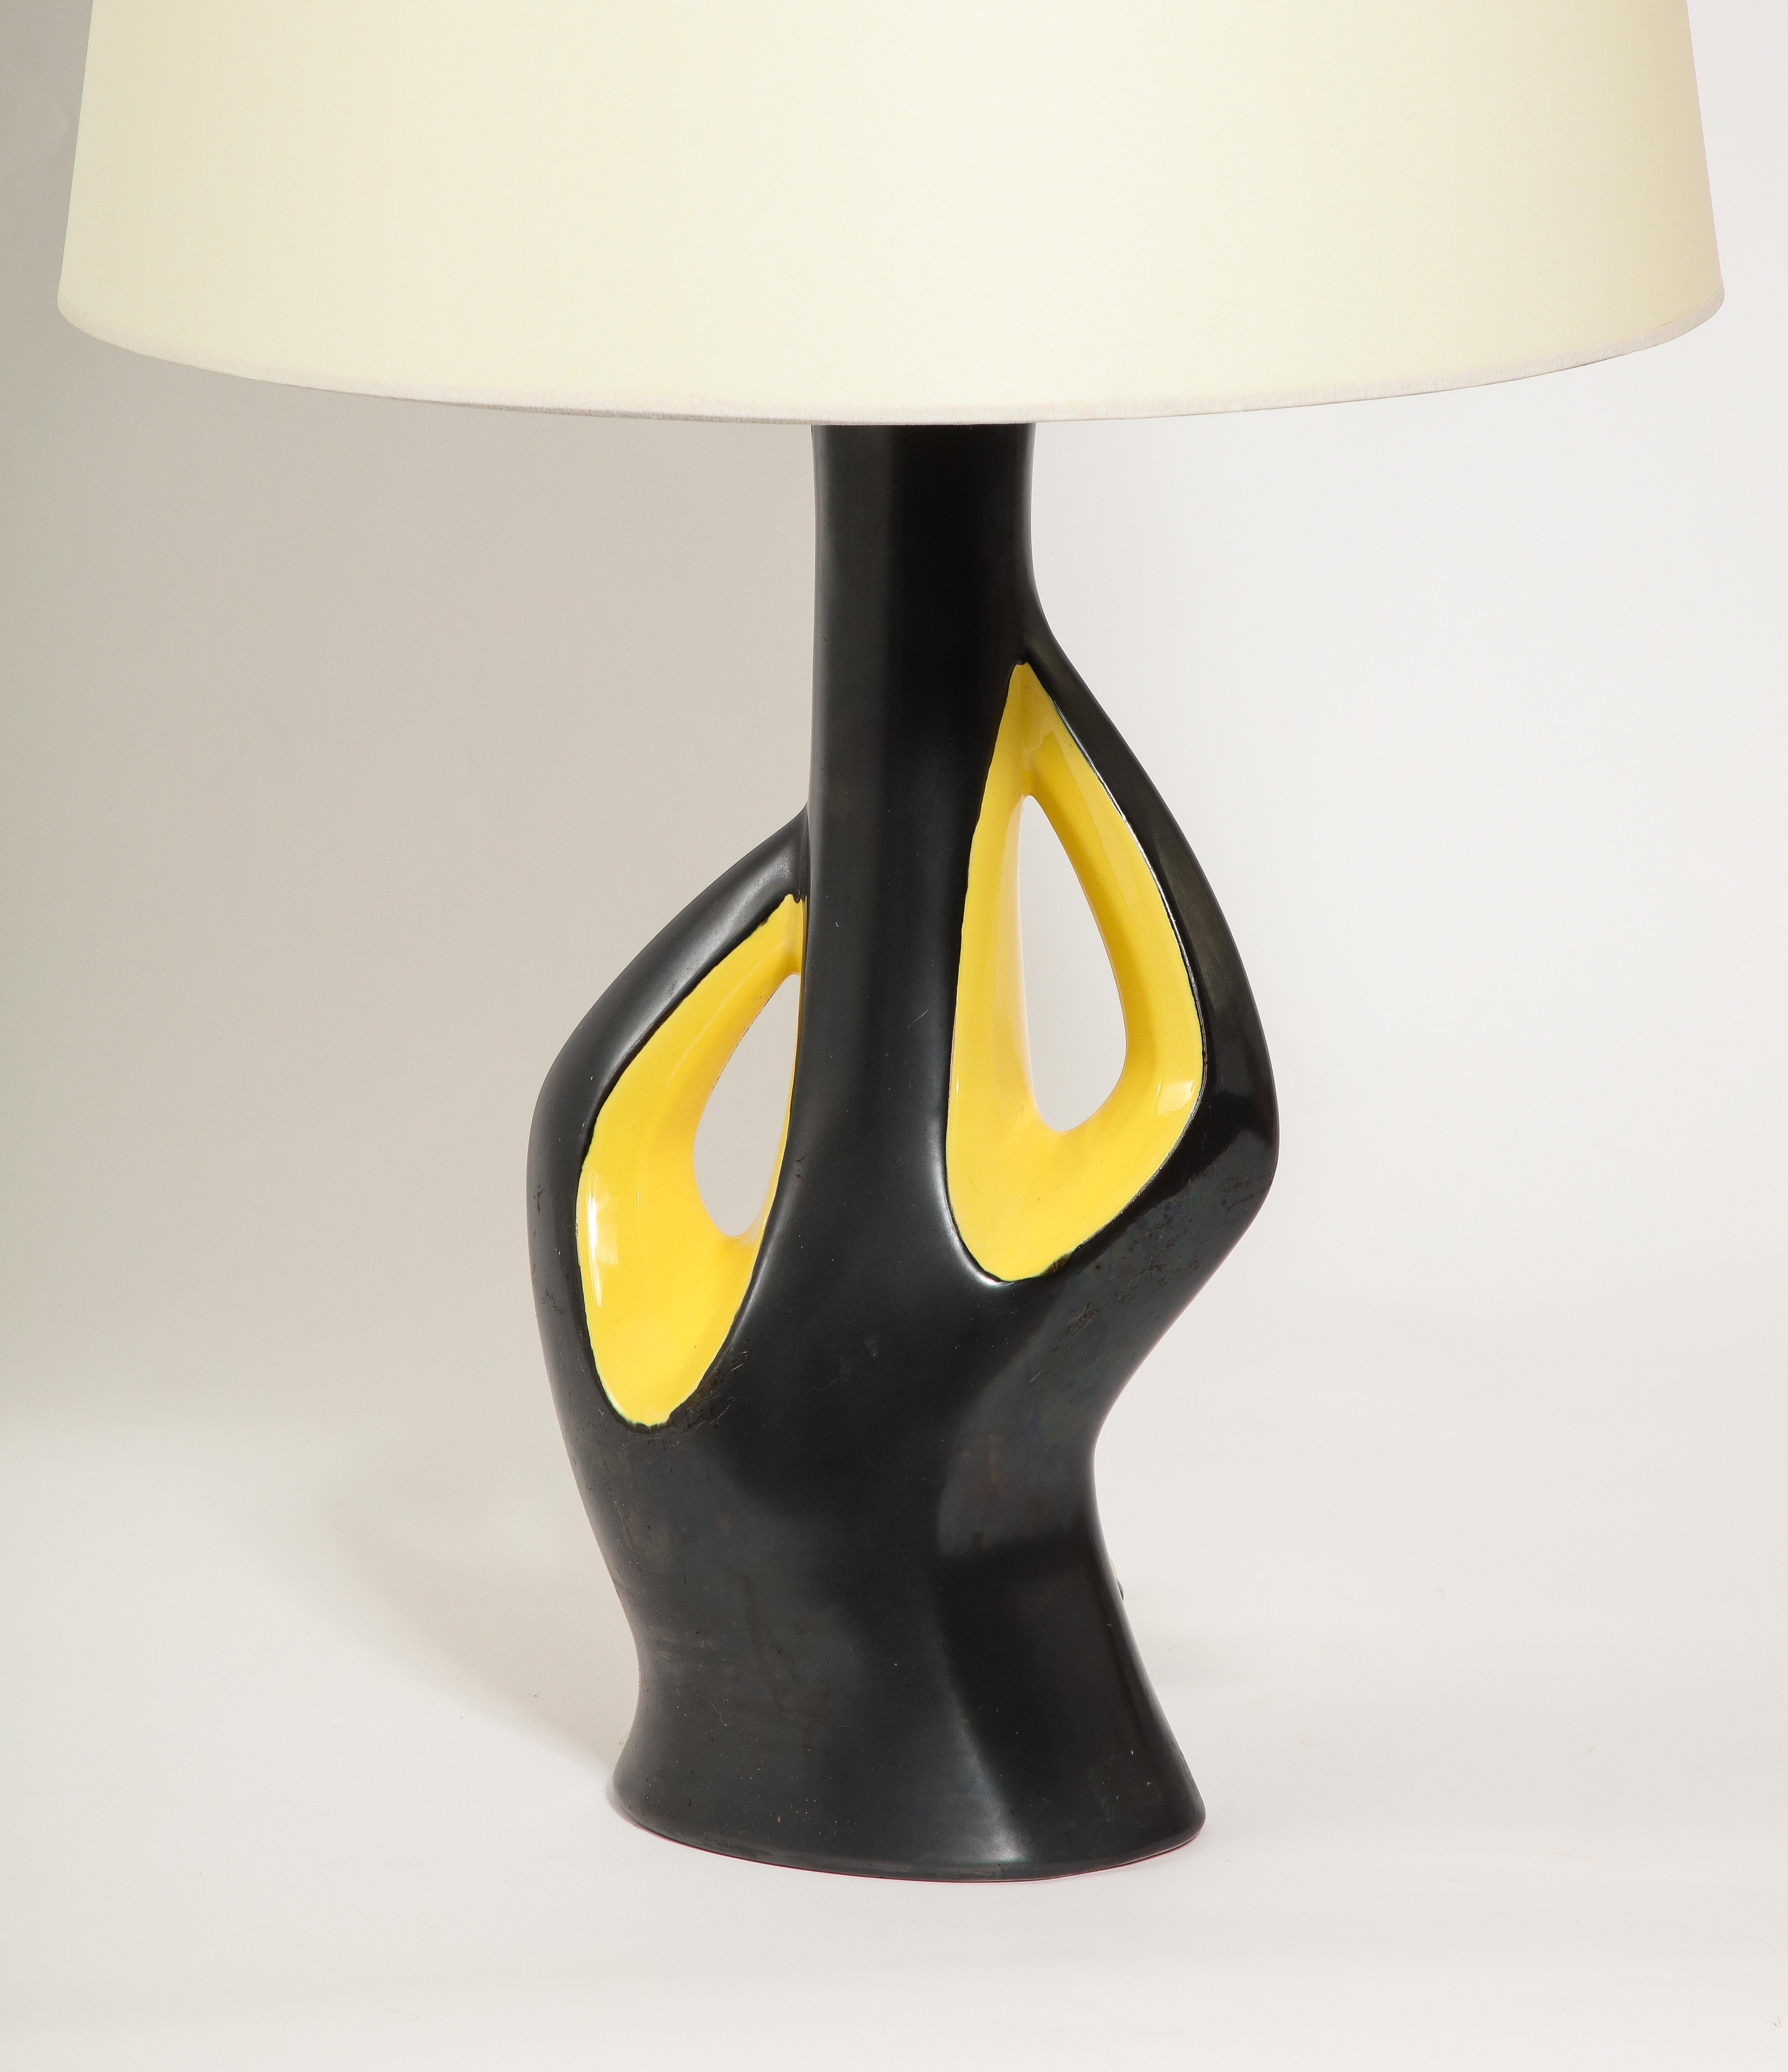 Large two Tone Elchinger Biomorphic ceramic lamp in classic fifties form.

19x4x8 Base Only